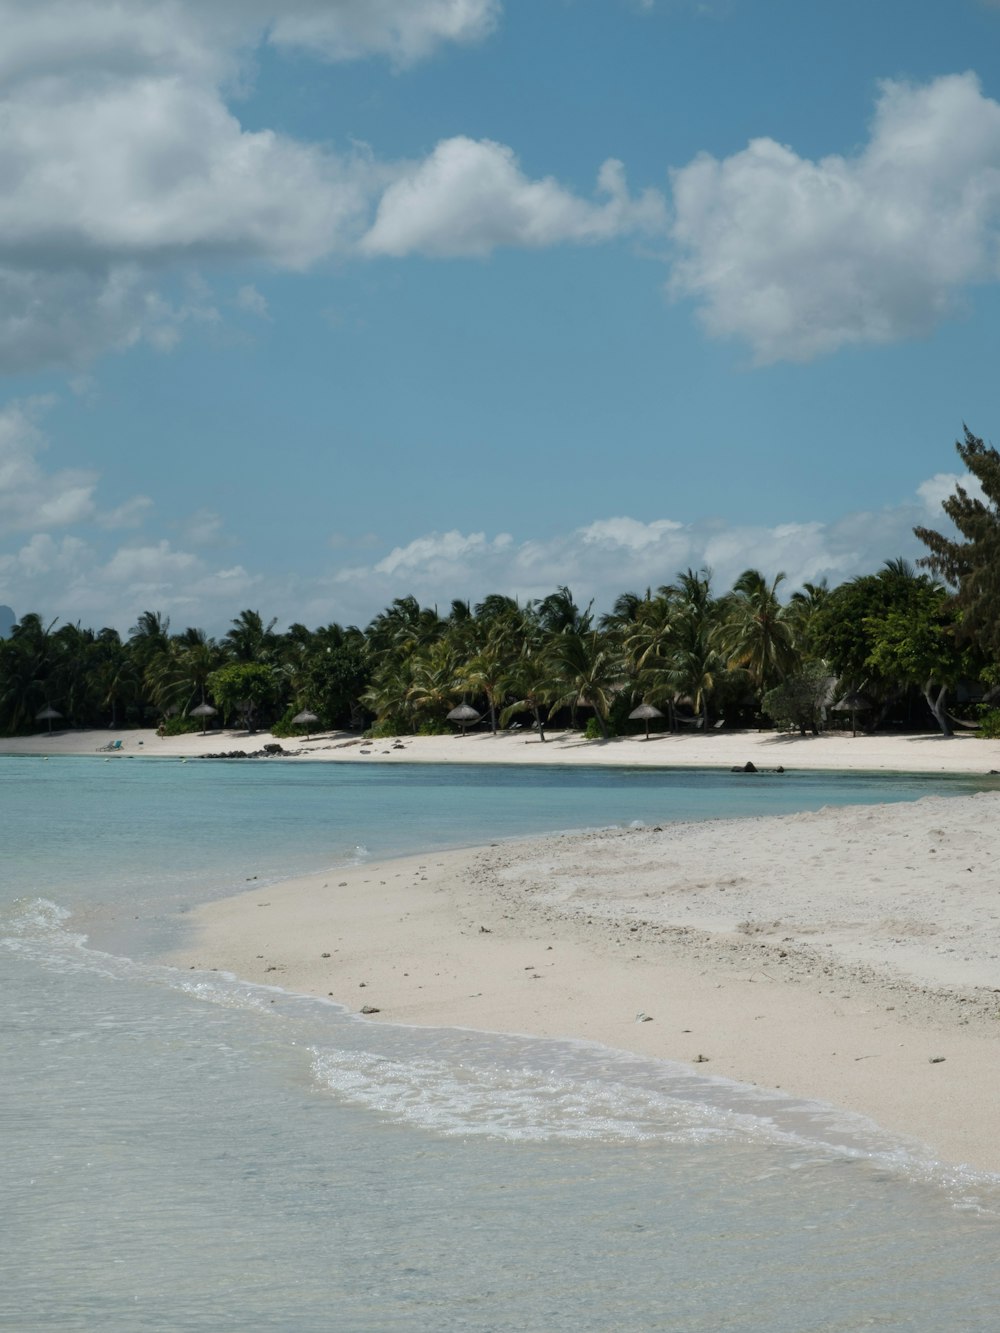 a sandy beach with palm trees in the background